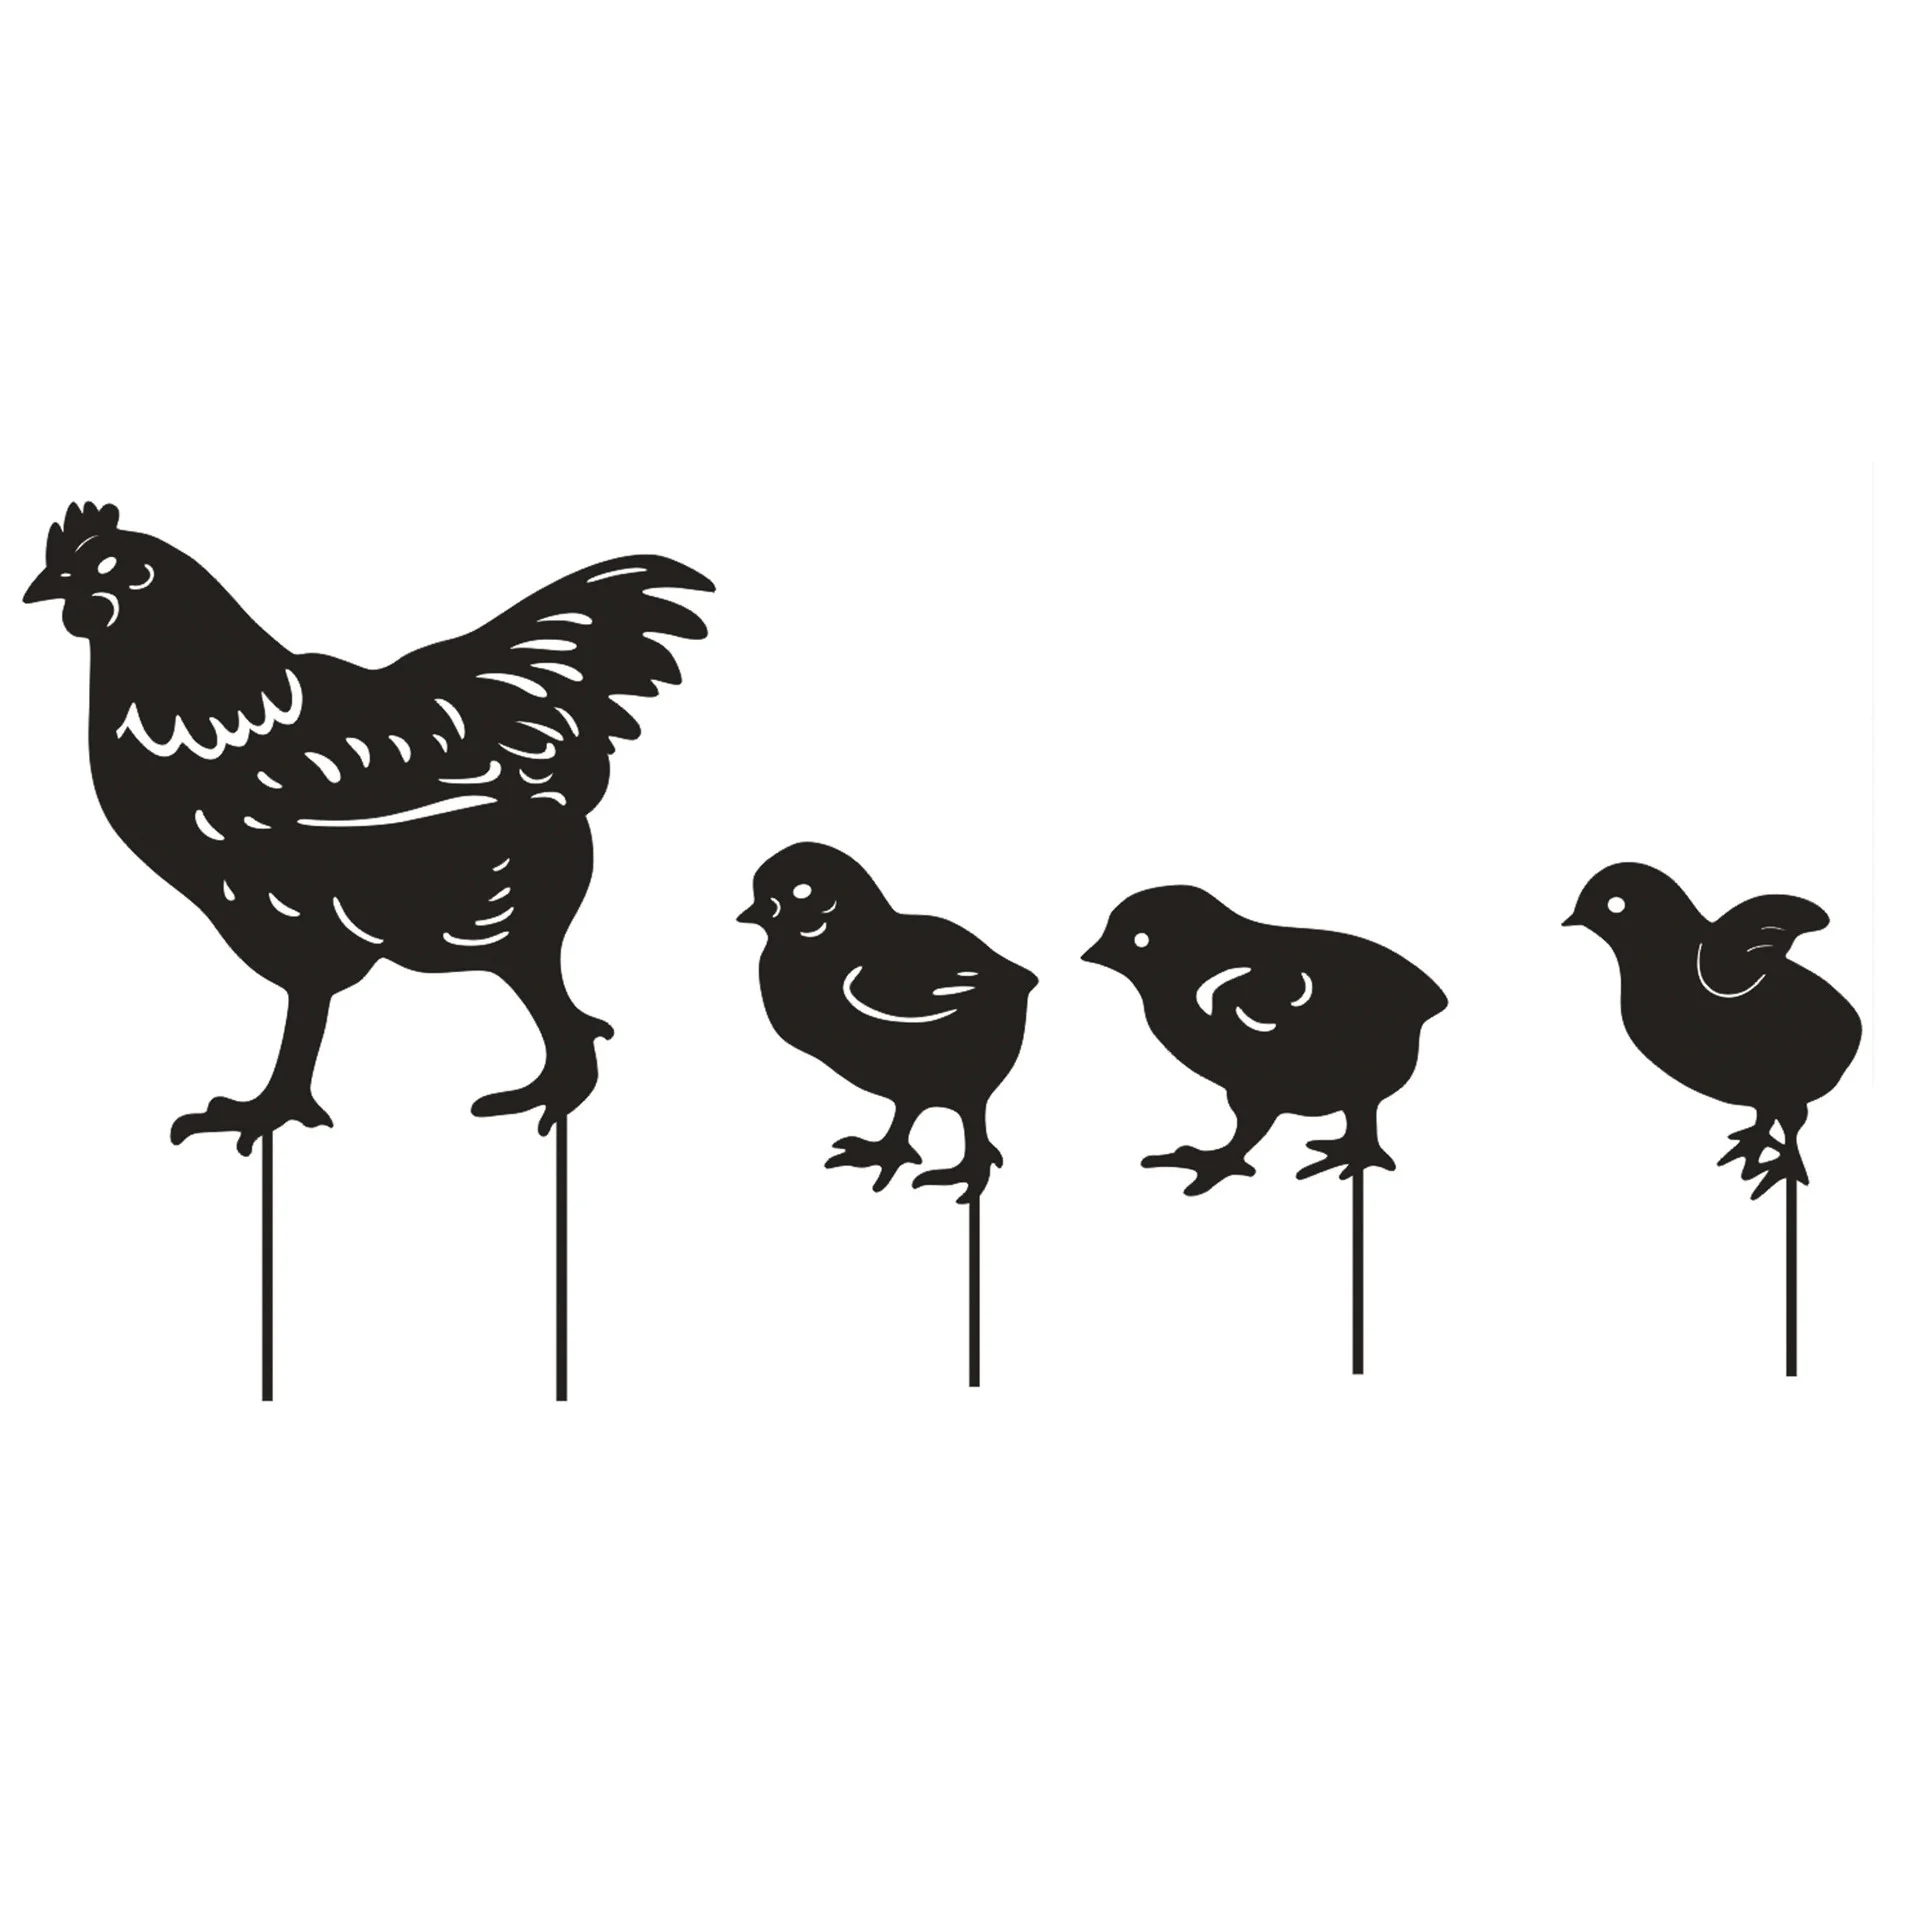 

Garden Chicken Silhouette Stakes Sun-proof And Waterproof Metal Animal Yard Art Black Decoration For Lawns Gardens Backyards